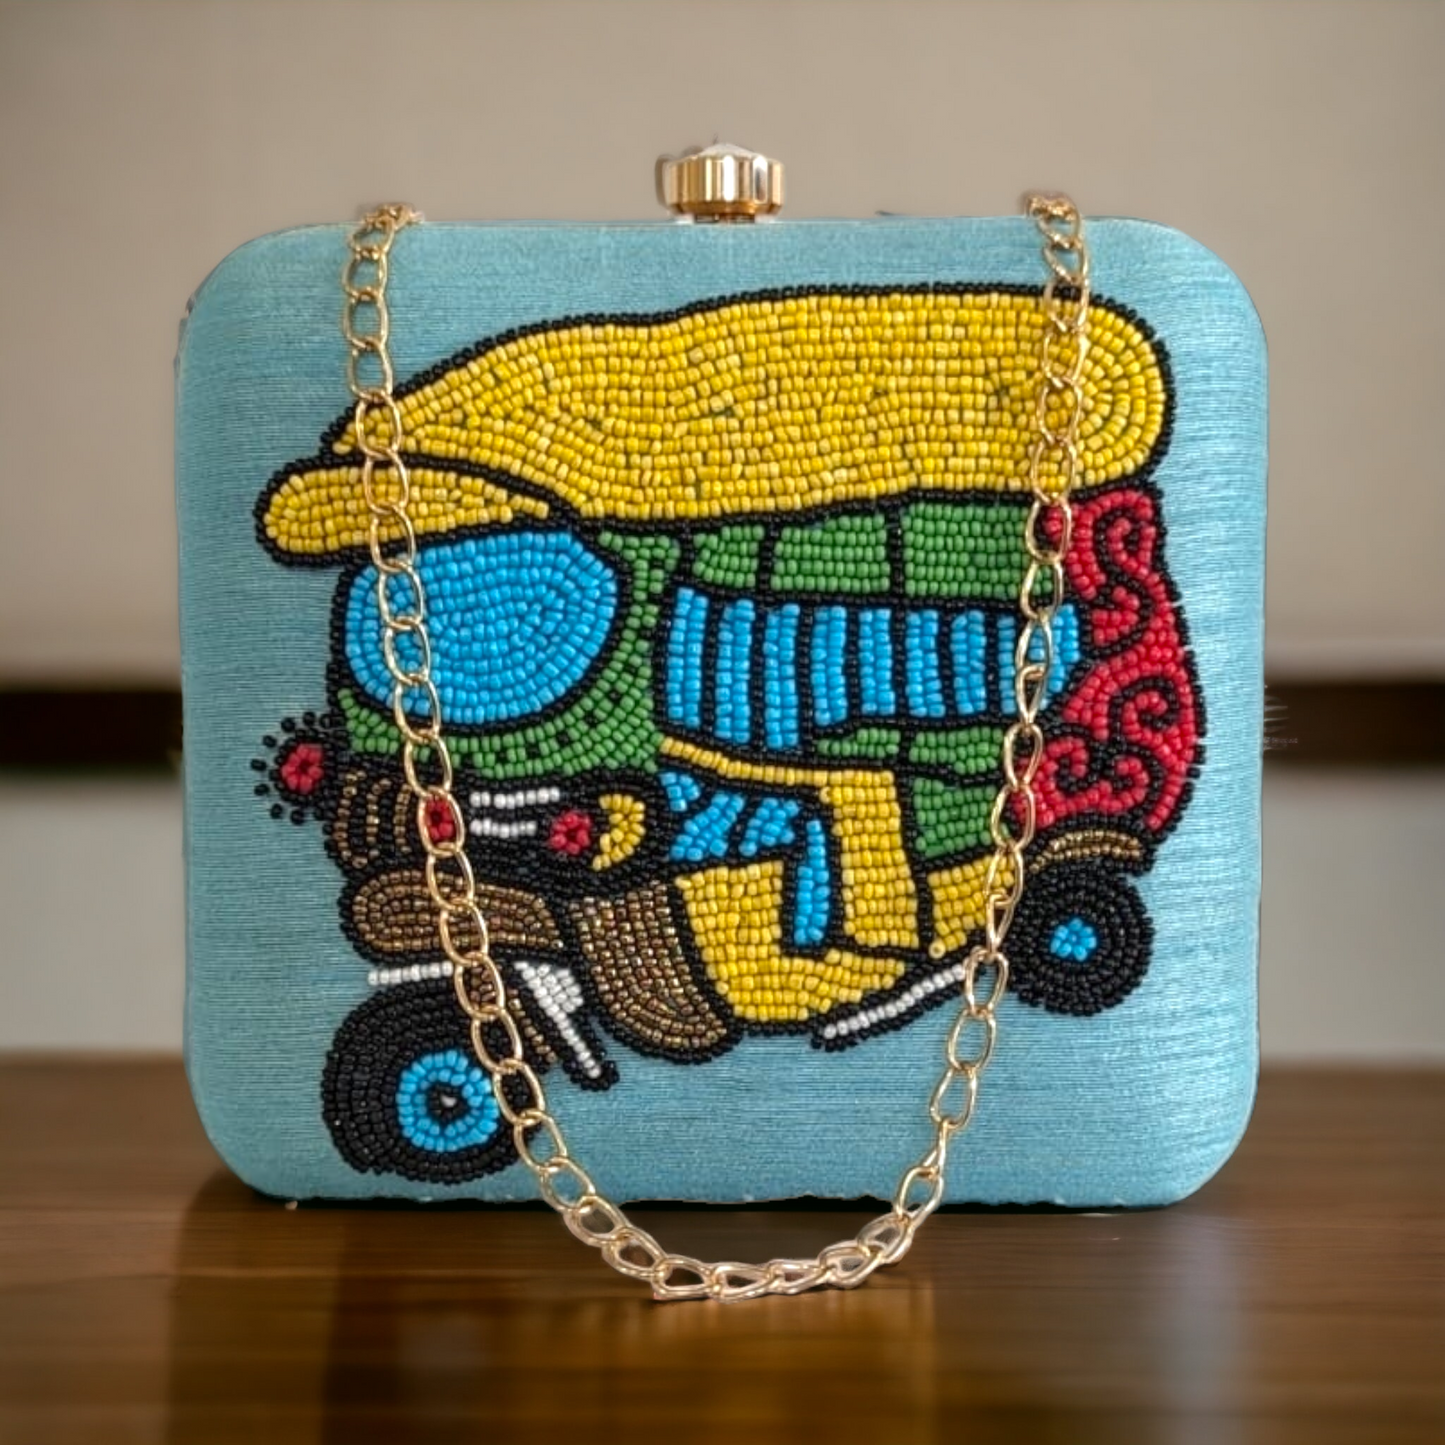 Clutch - Pop-up Embroidery TukTuk